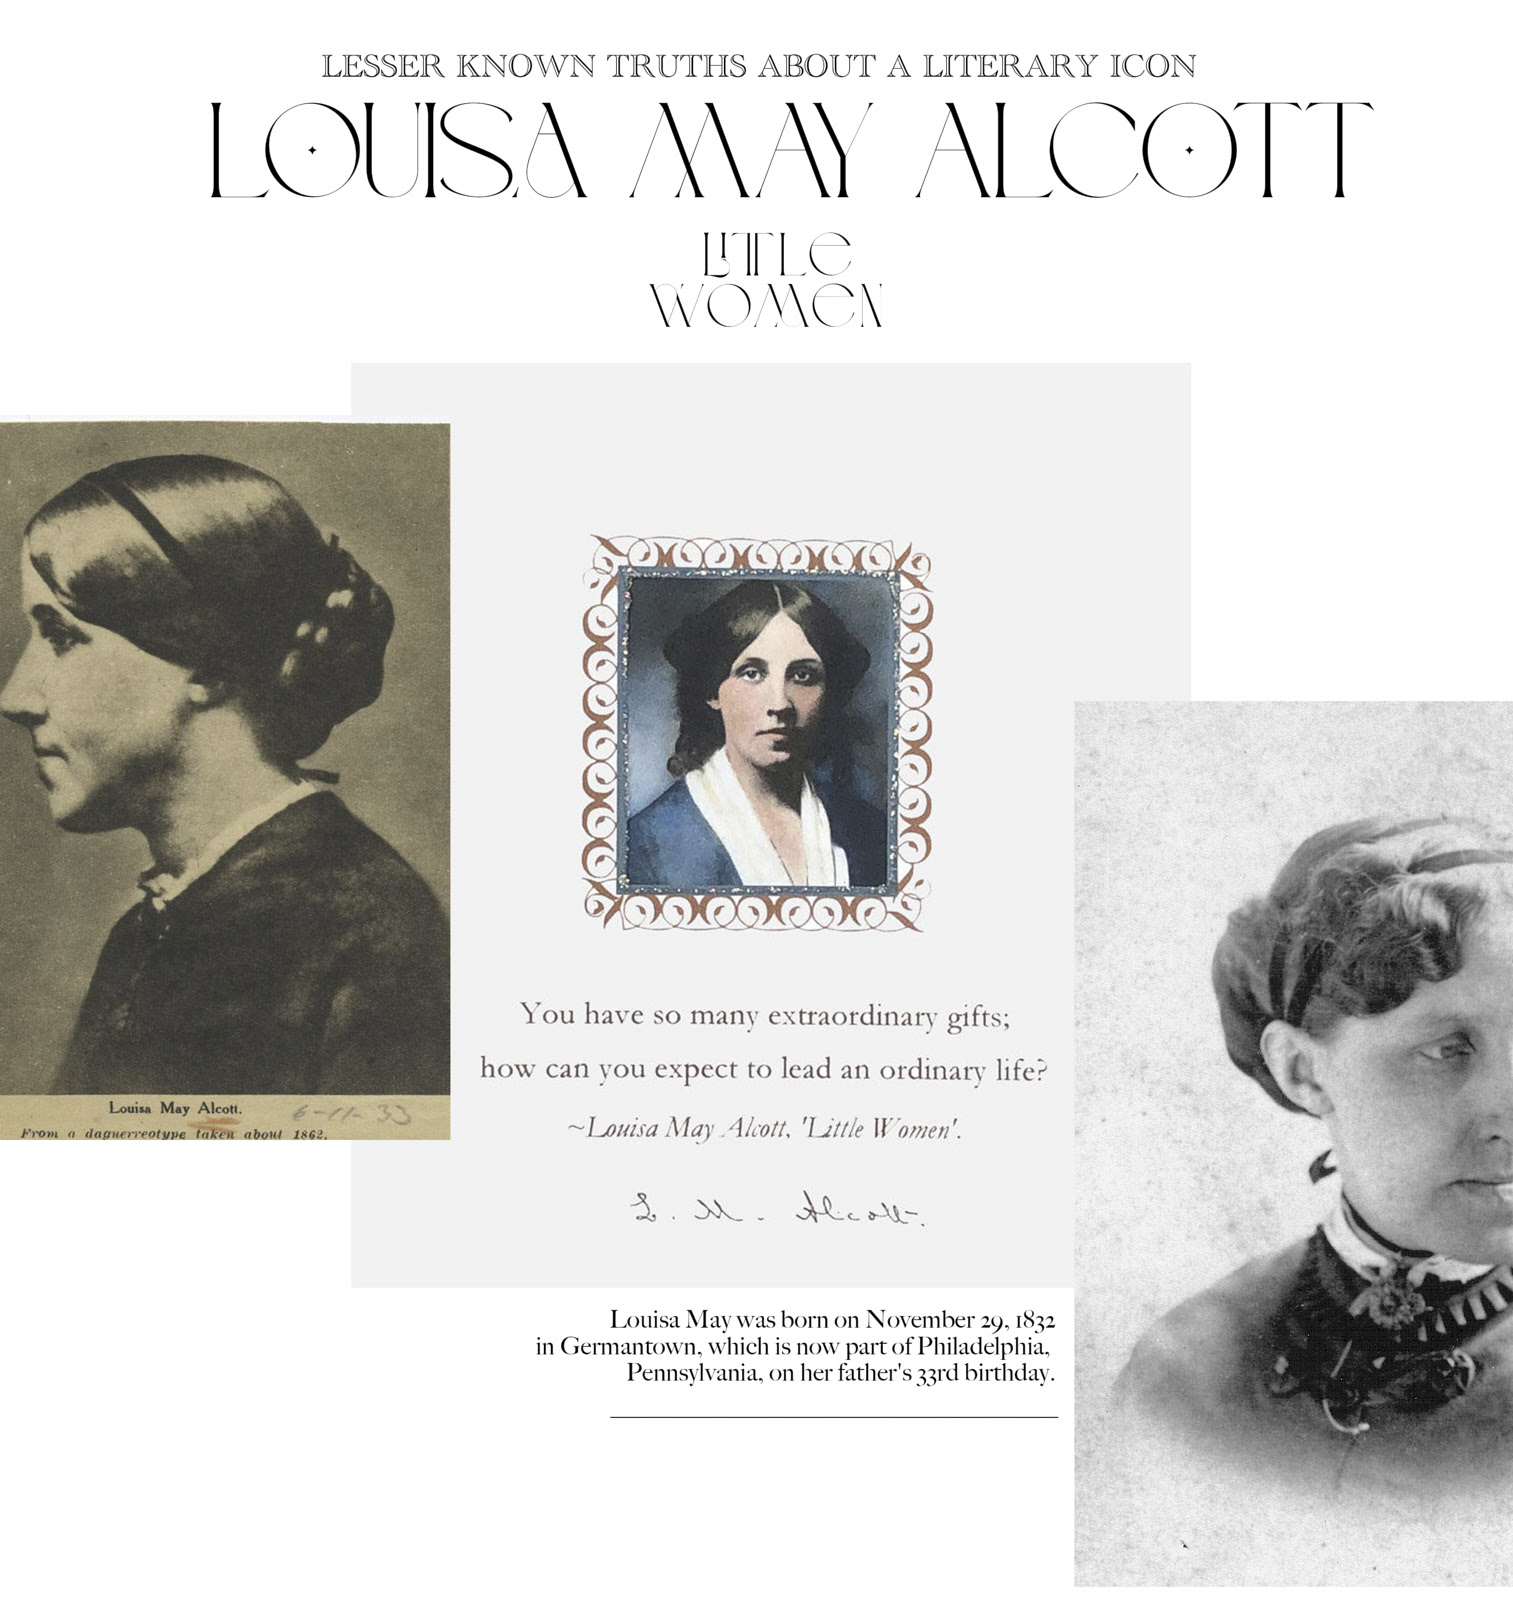 Lesser known truths about a literary icon, Louisa May Alcott